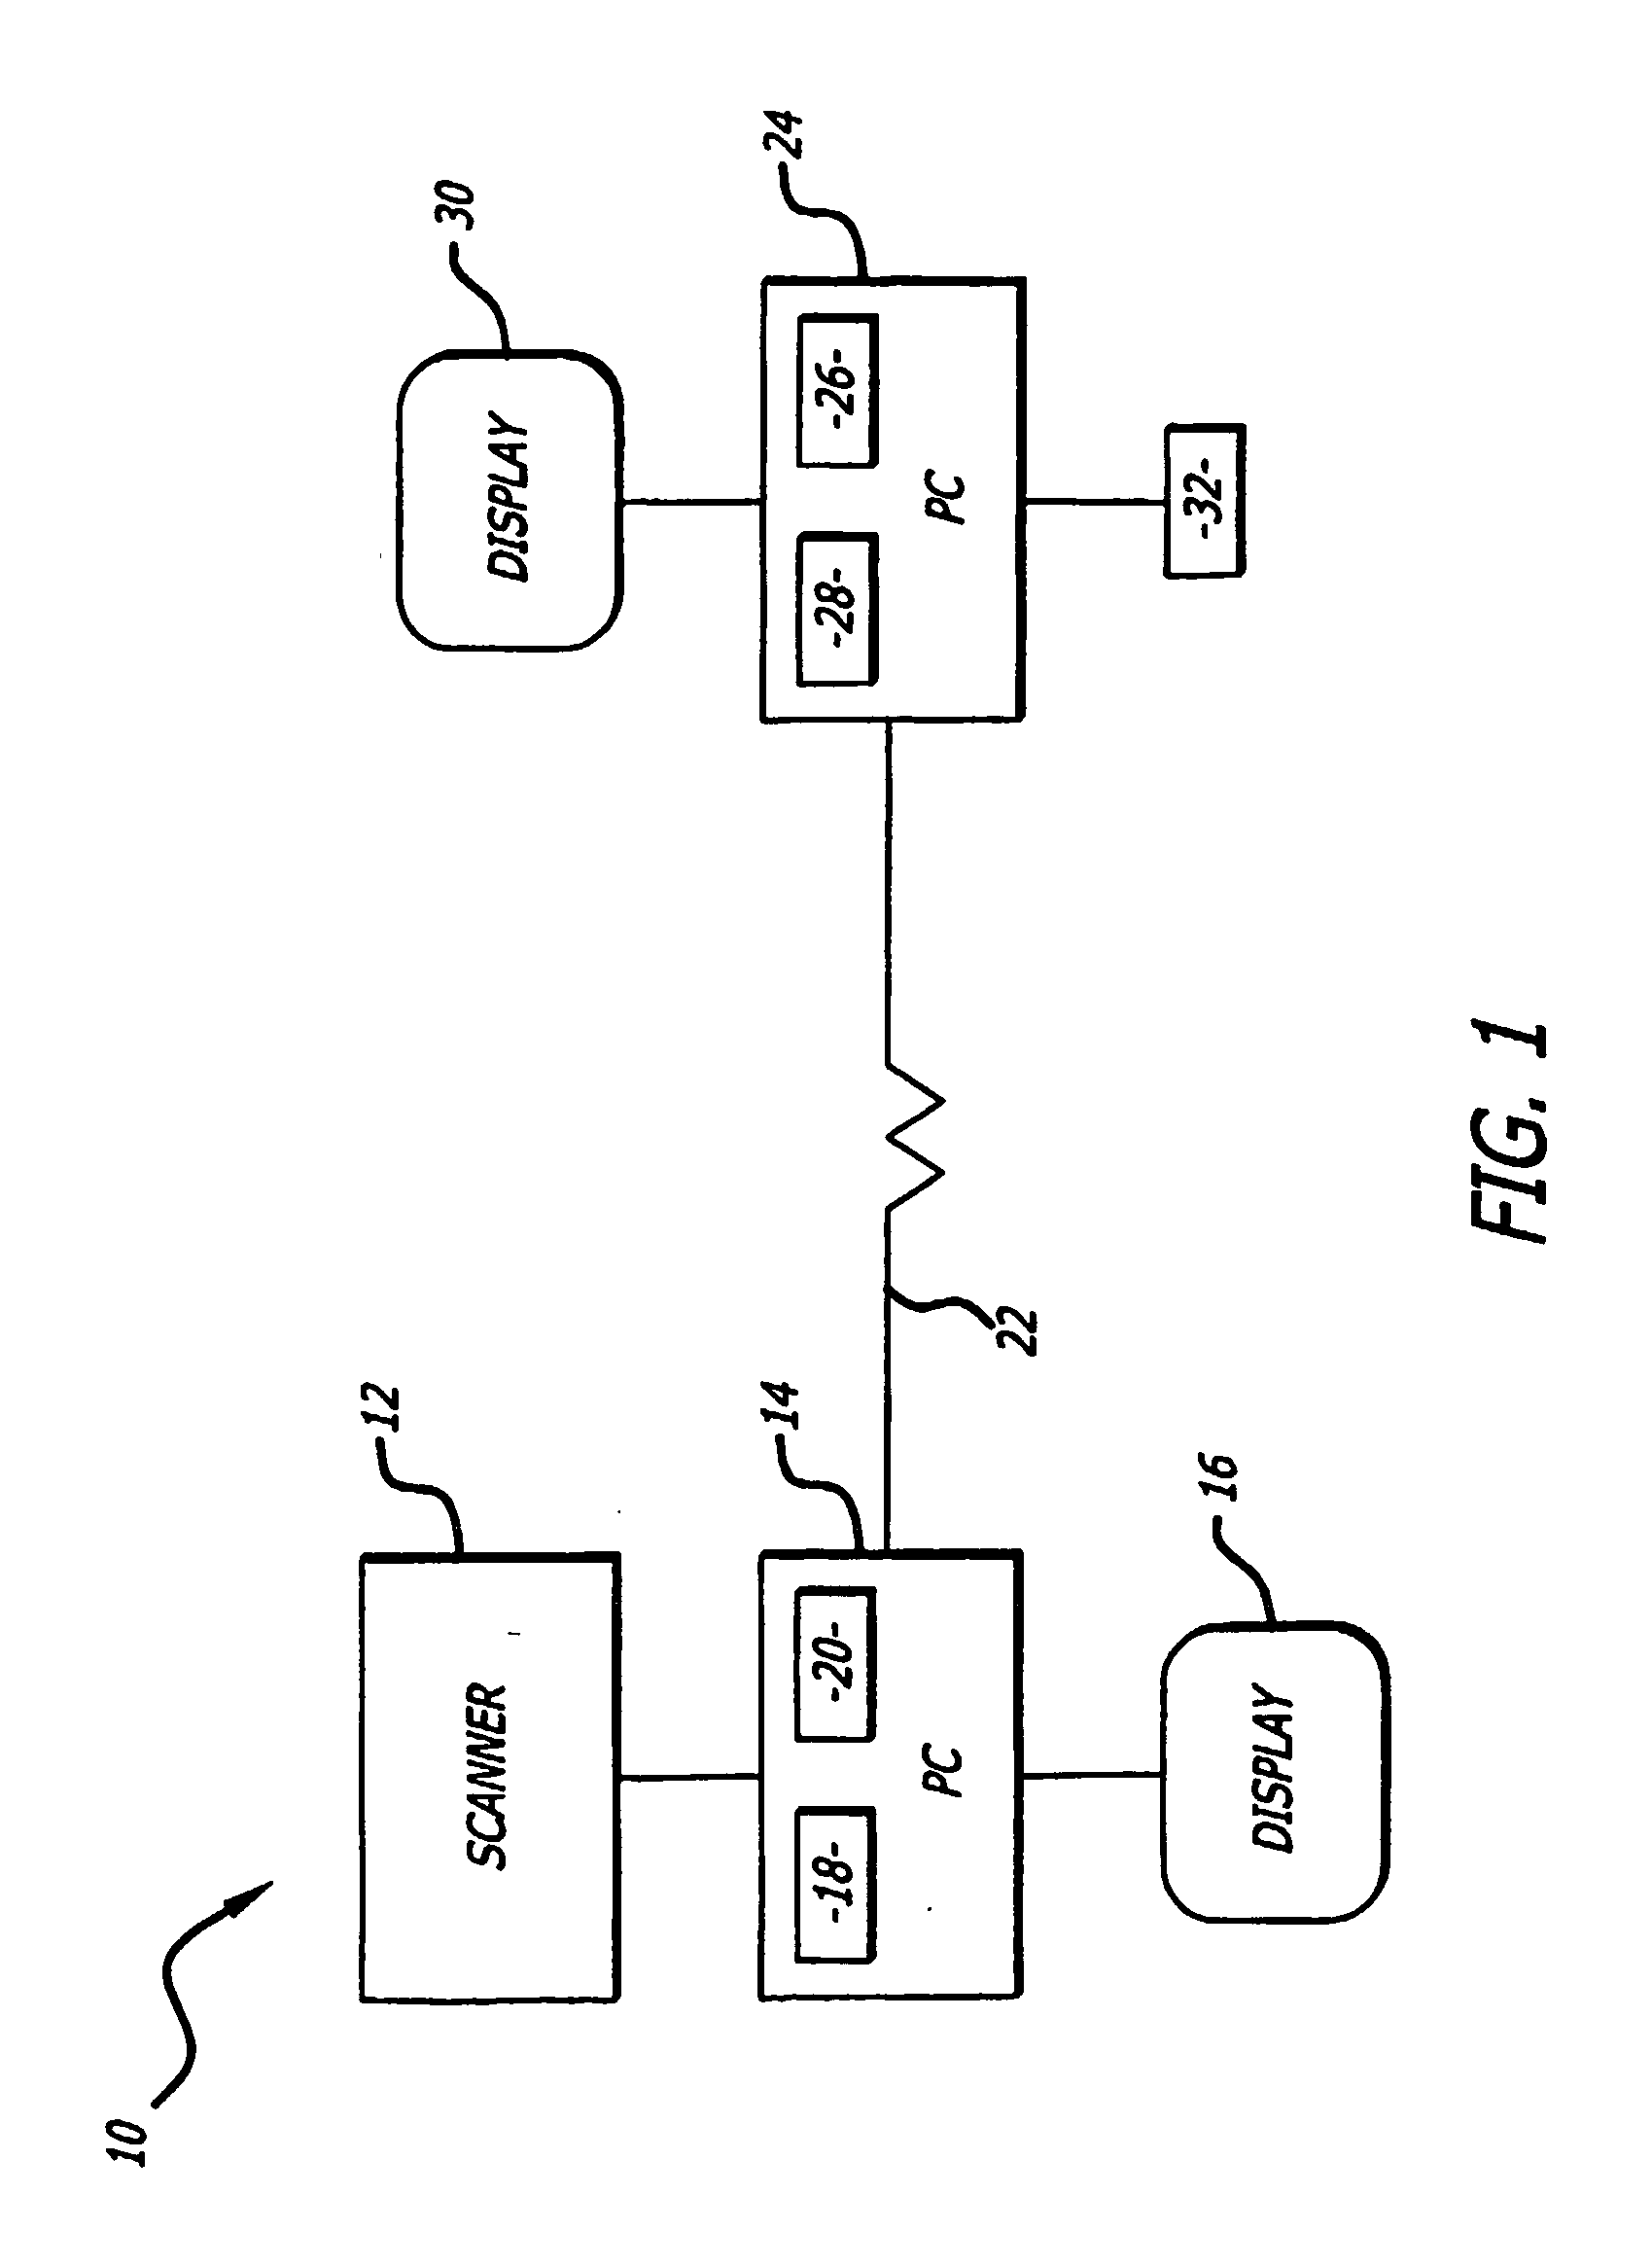 System and method for analyzing and displaying computed tomography data